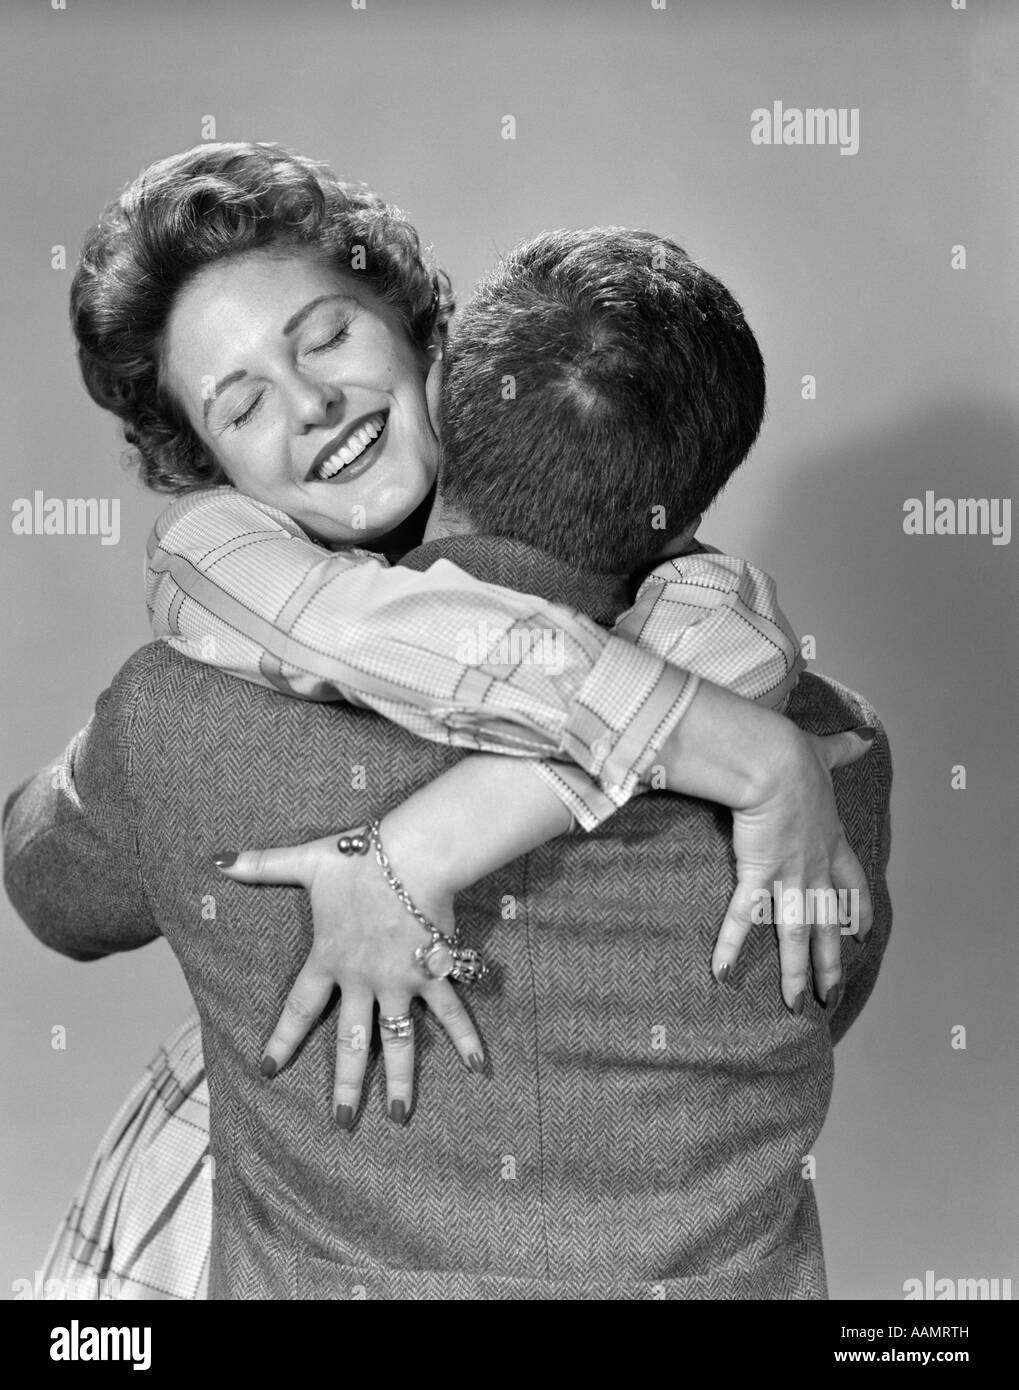 1950s COUPLE HAPPY SMILING WOMAN FACING FORWARD HANDS DRAPED OVER MANS BACK HUGGING EMBRACING THRILLED LOVE Stock Photo